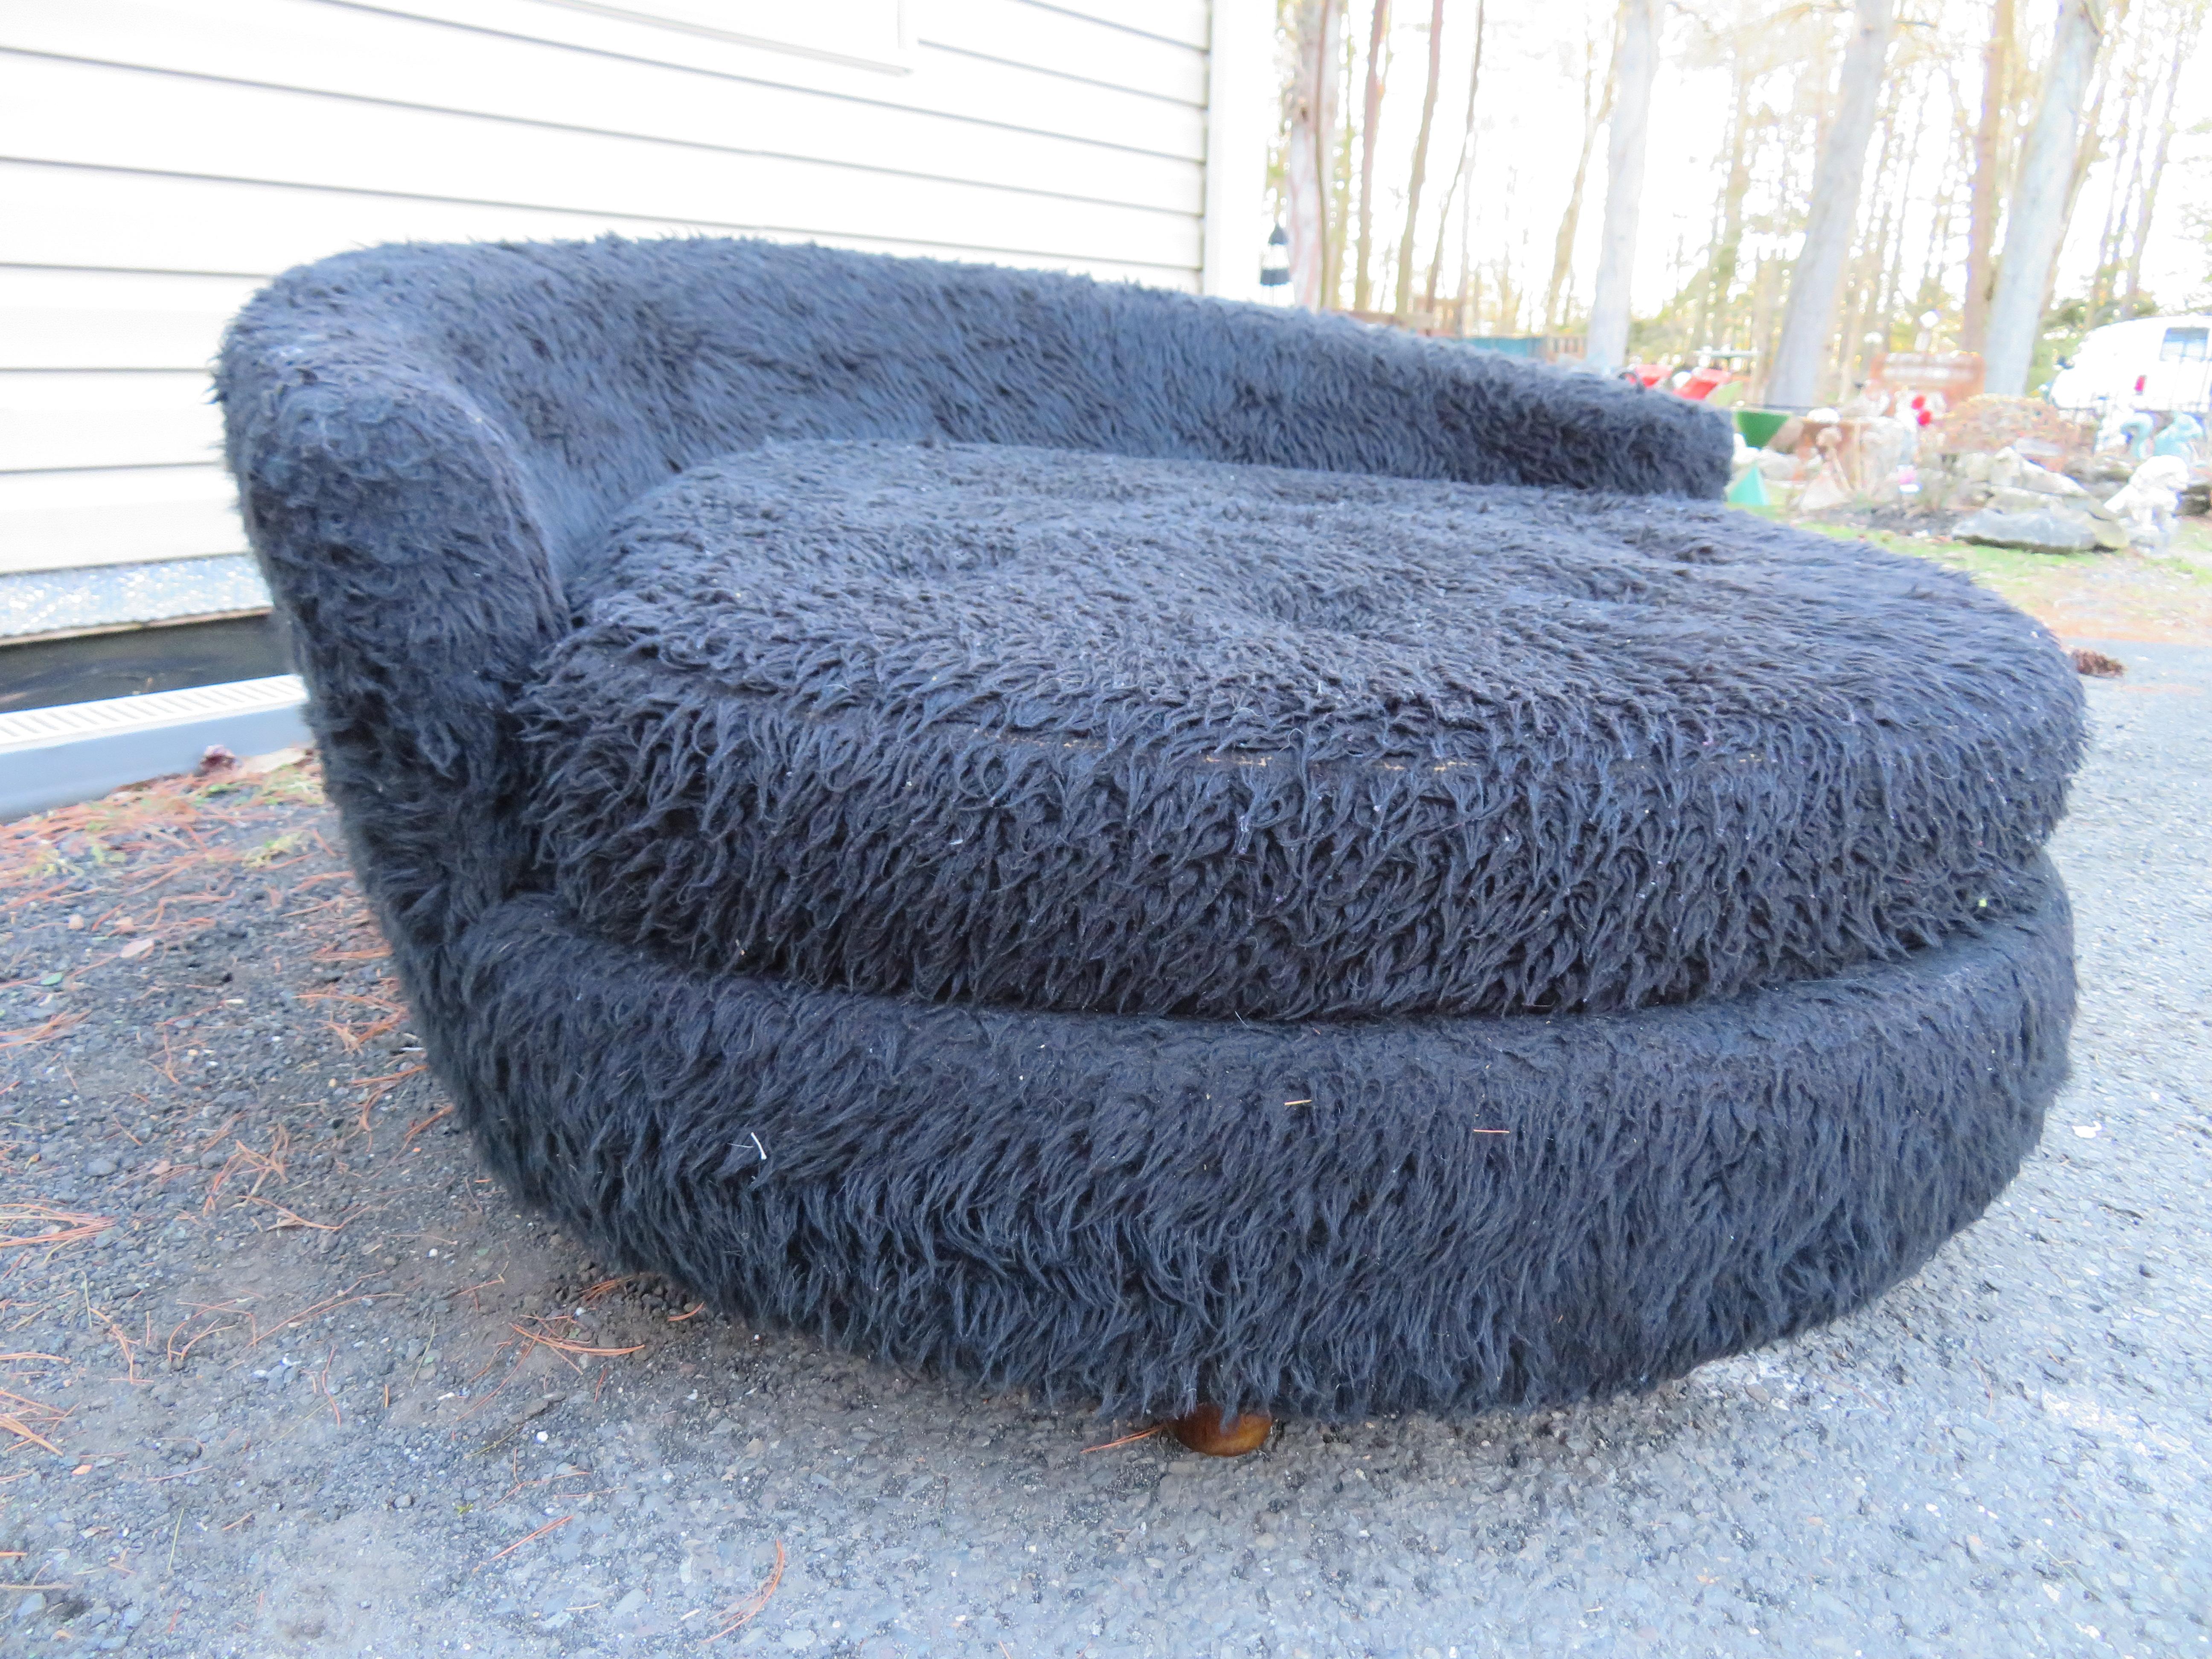 Fun Adrian Pearsall circular chaise lounge chair. This fuzzy chair retains its original grizzly bear fun fur and will need to be reupholstered. It measures 24